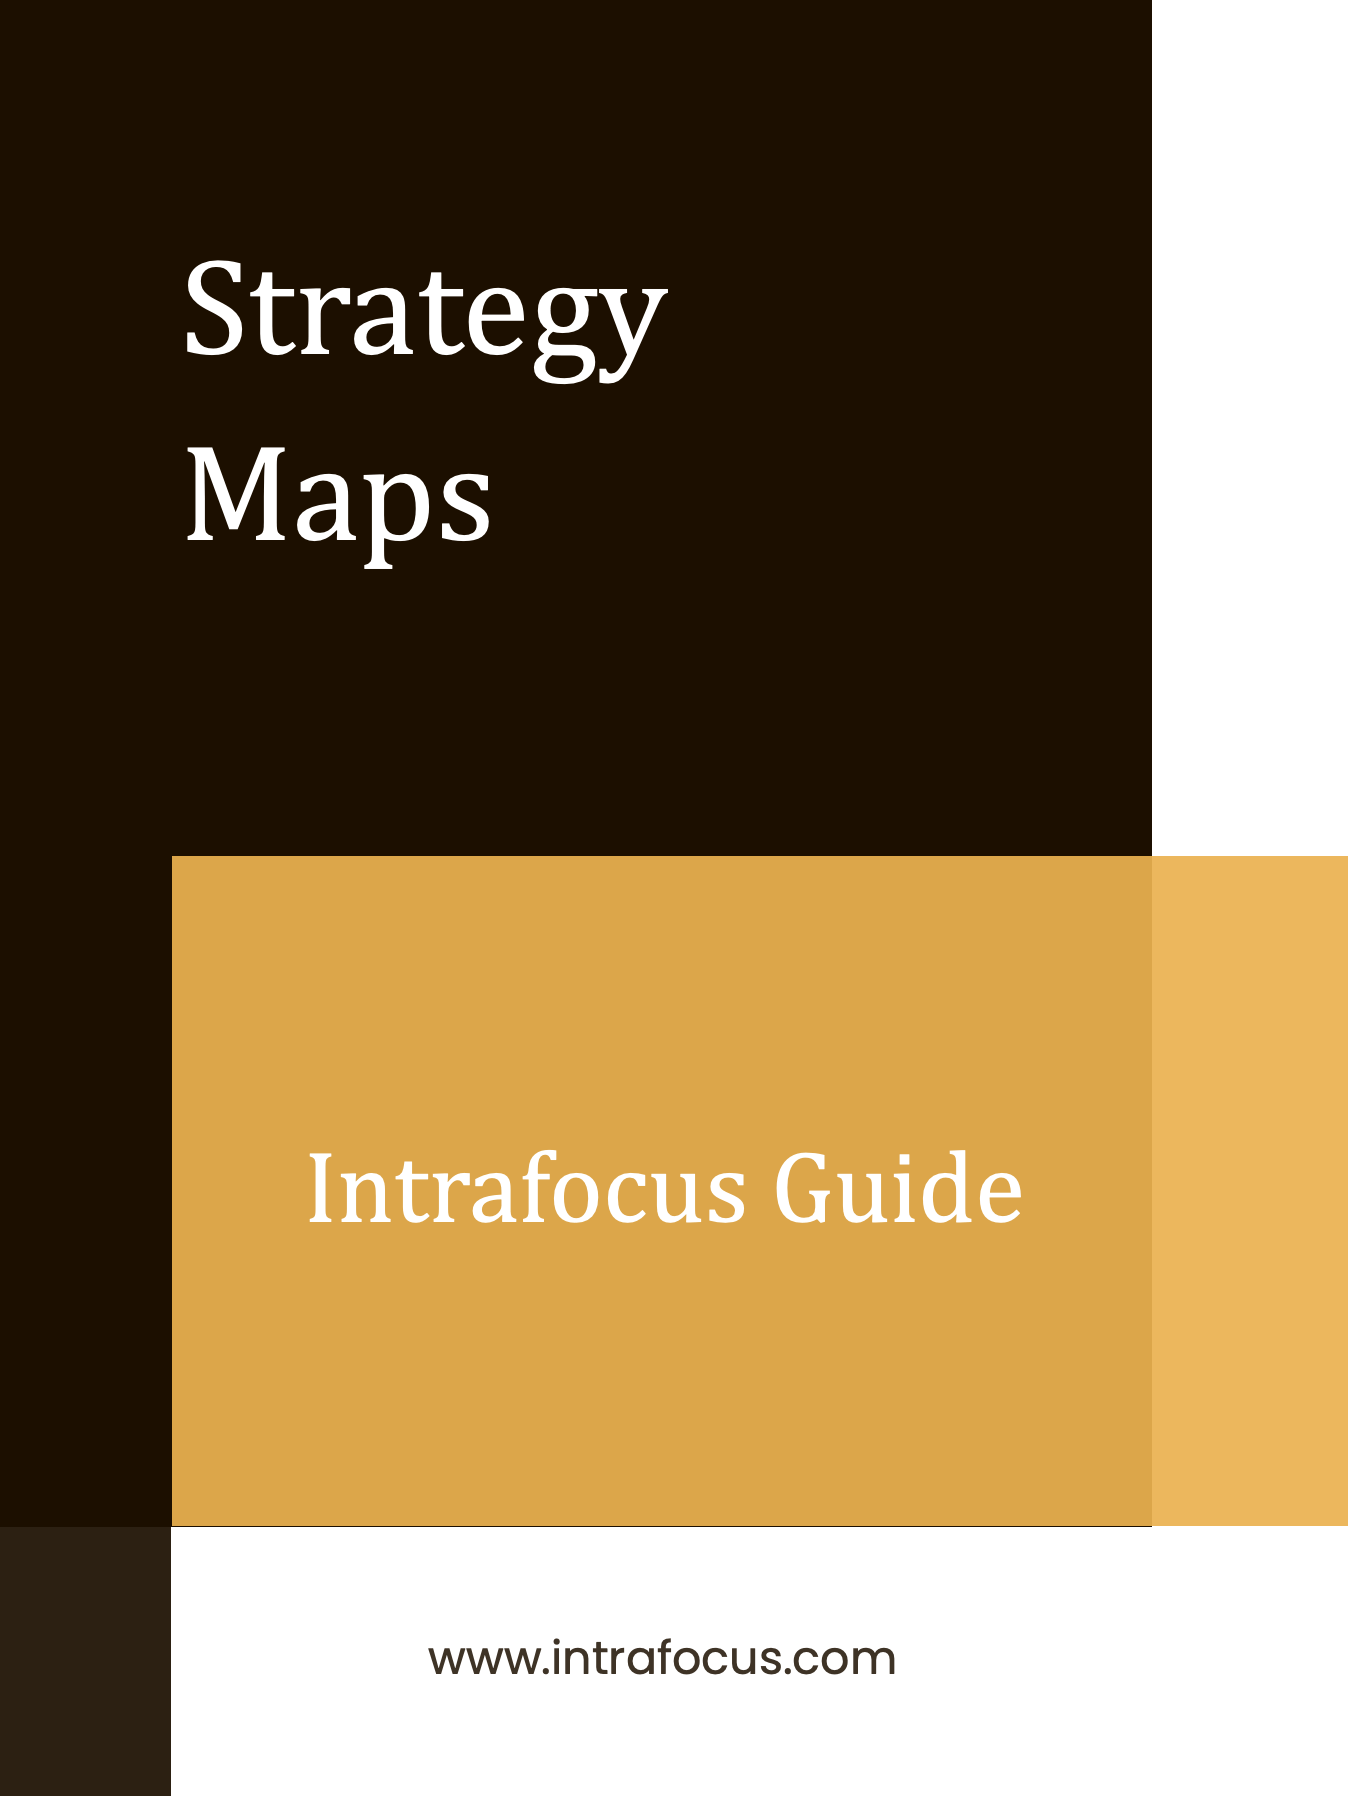 Strategy Maps - A Guide from Intrafocus